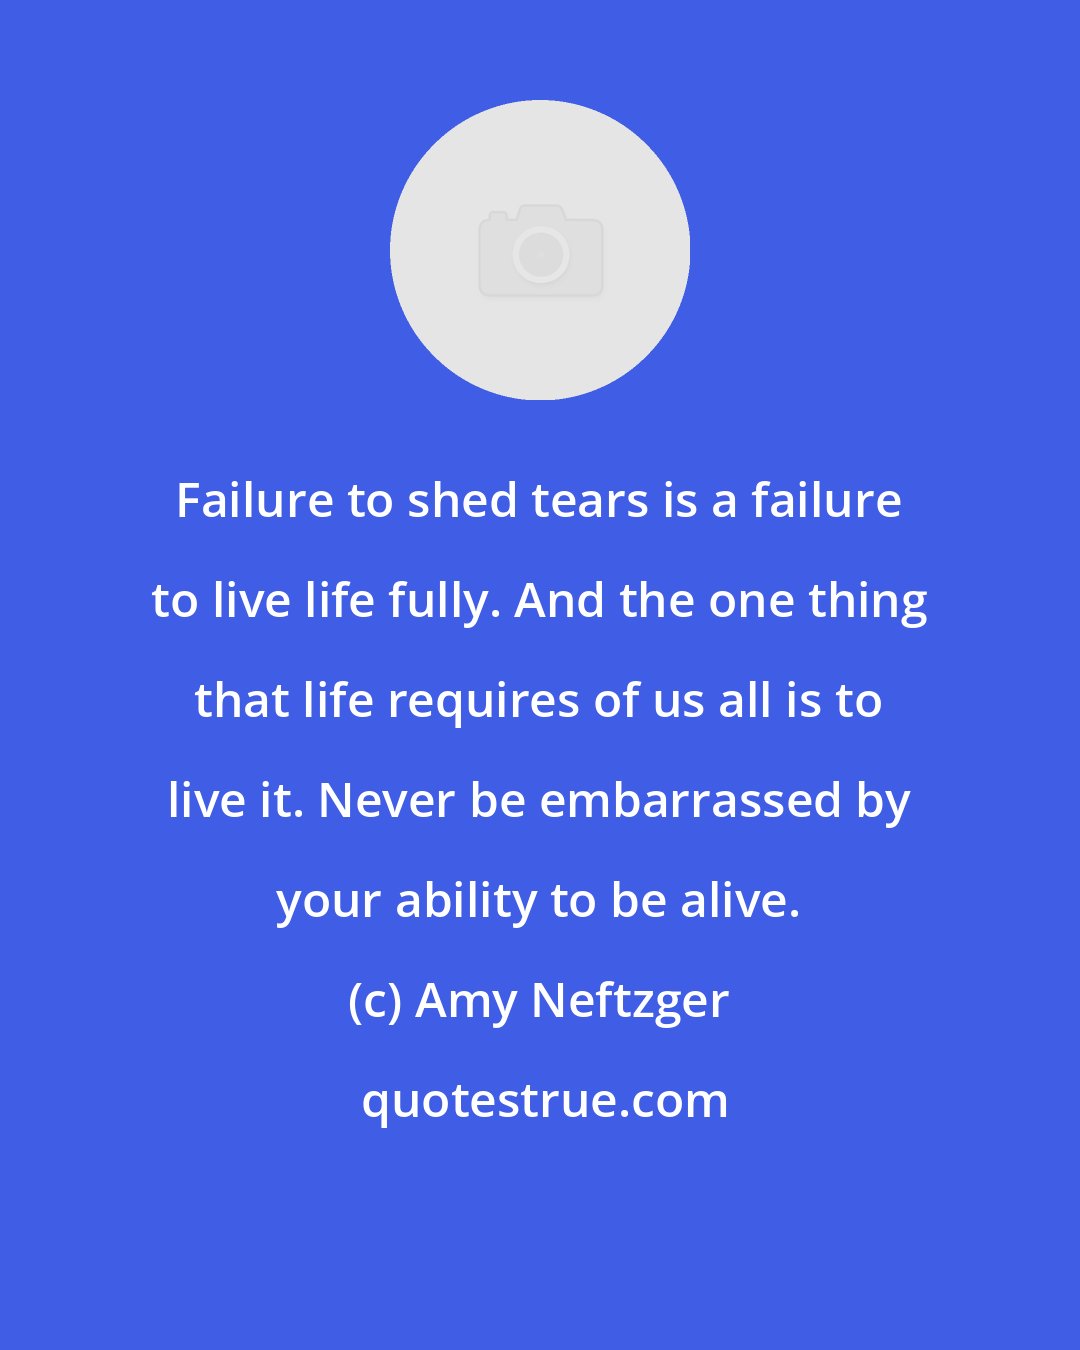 Amy Neftzger: Failure to shed tears is a failure to live life fully. And the one thing that life requires of us all is to live it. Never be embarrassed by your ability to be alive.